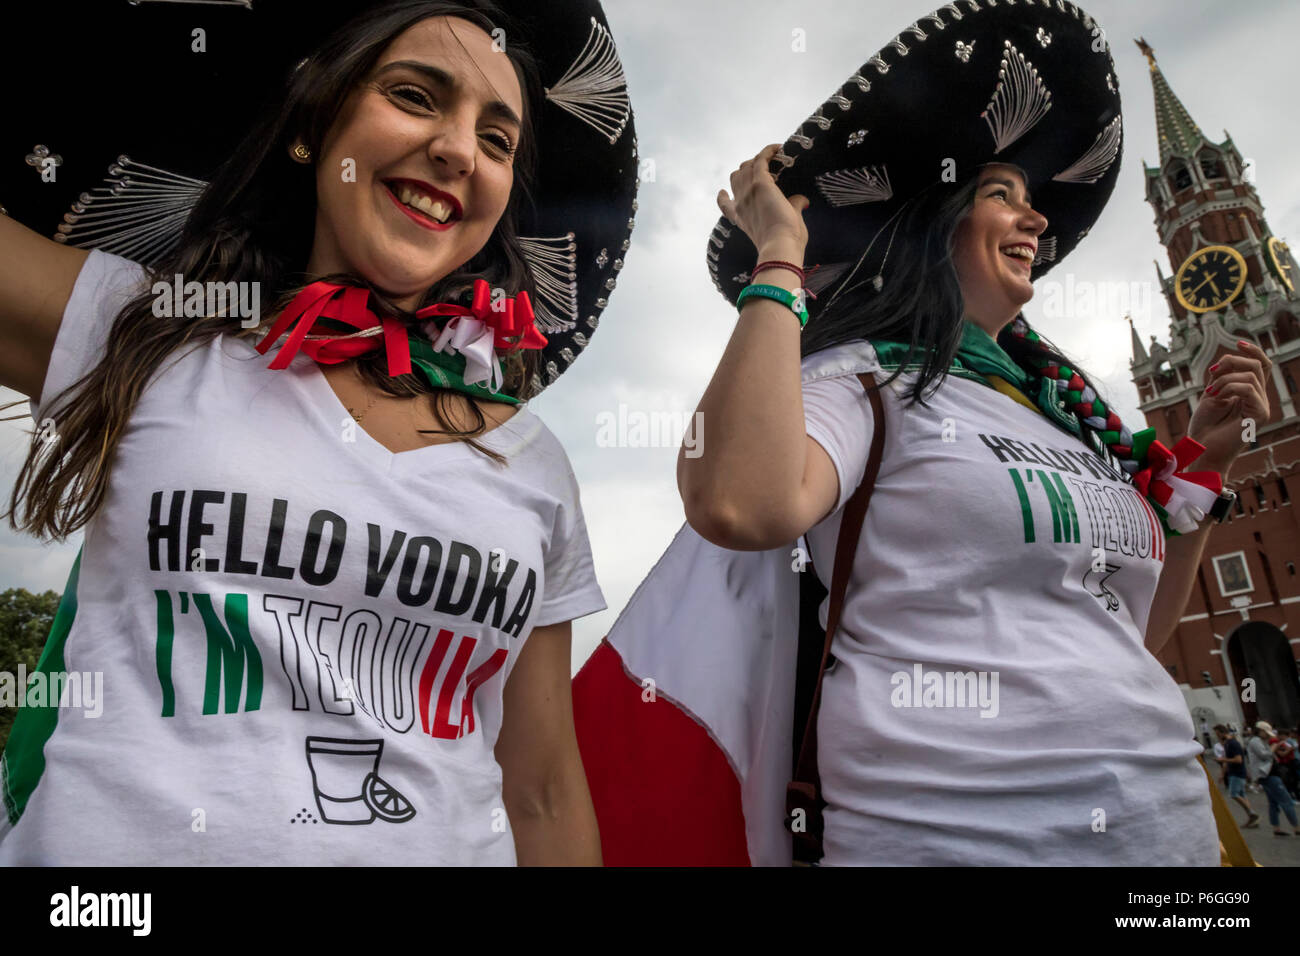 Mexican women in a sombrero with an inscription on T-shirts 'Hello vodka I am tequila' are walking along Red Square in Moscow during the World Cup Stock Photo